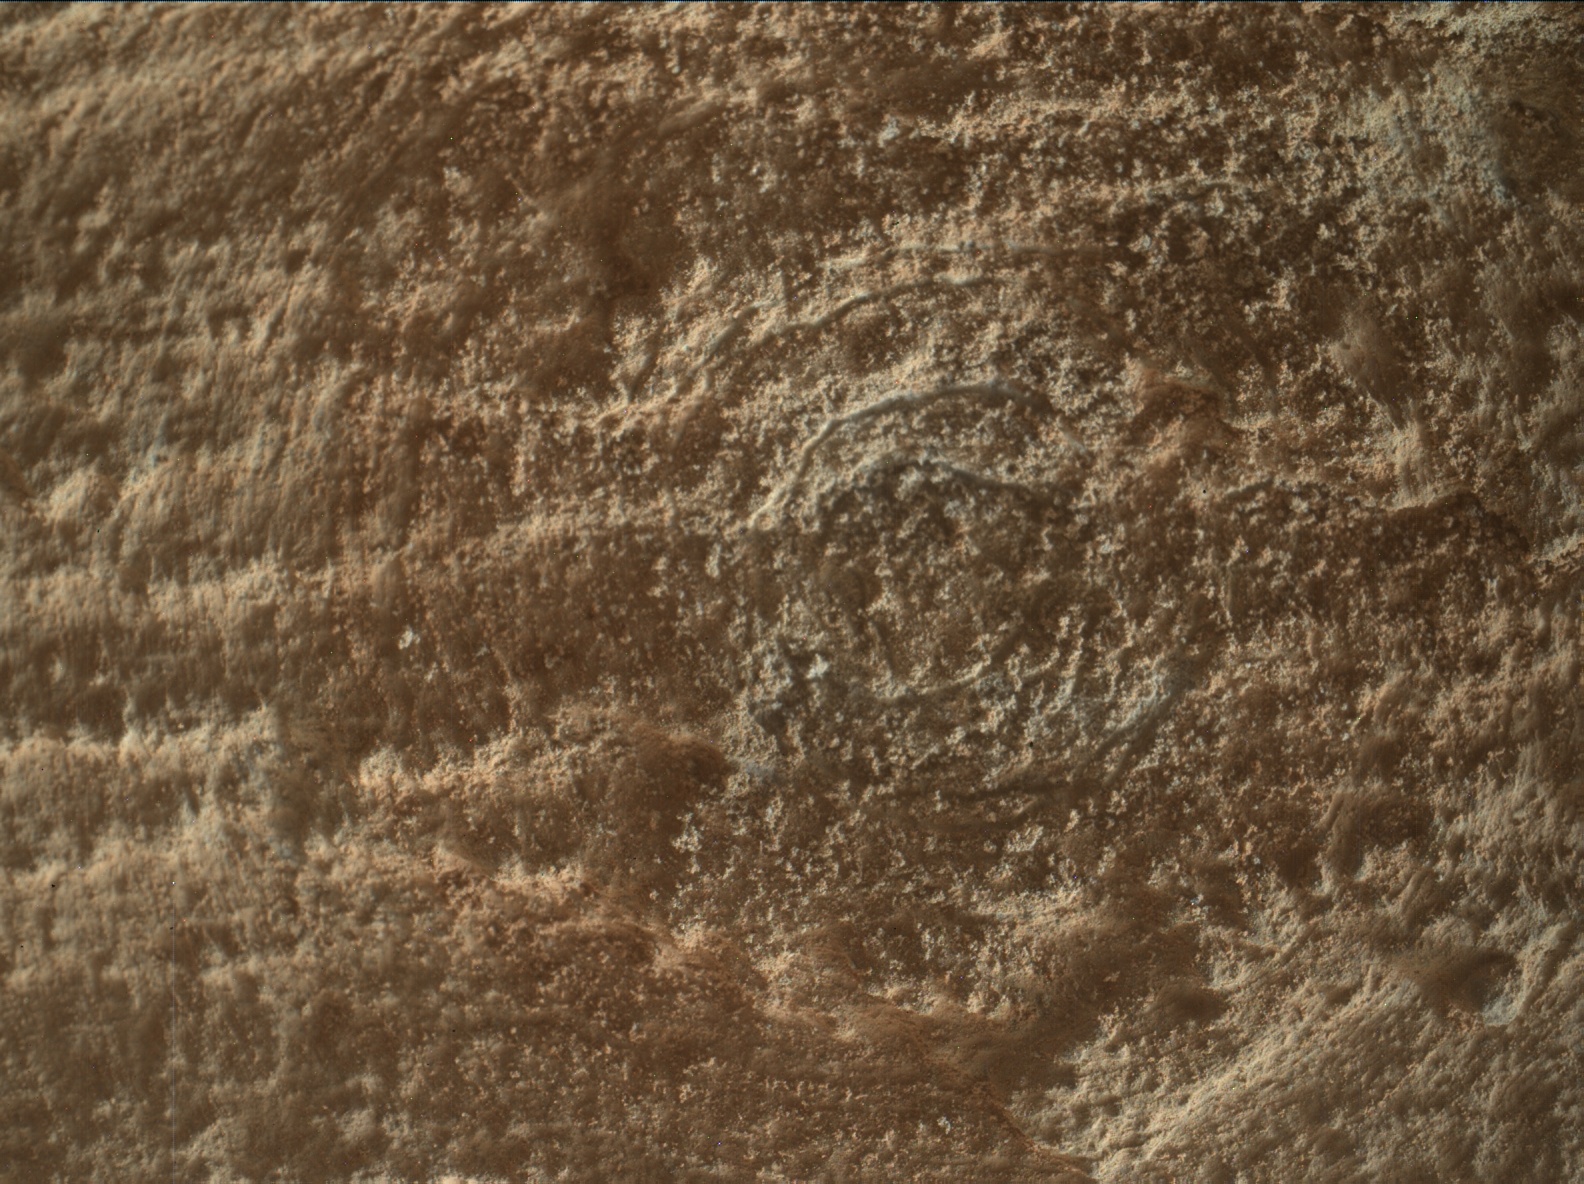 Nasa's Mars rover Curiosity acquired this image using its Mars Hand Lens Imager (MAHLI) on Sol 3395